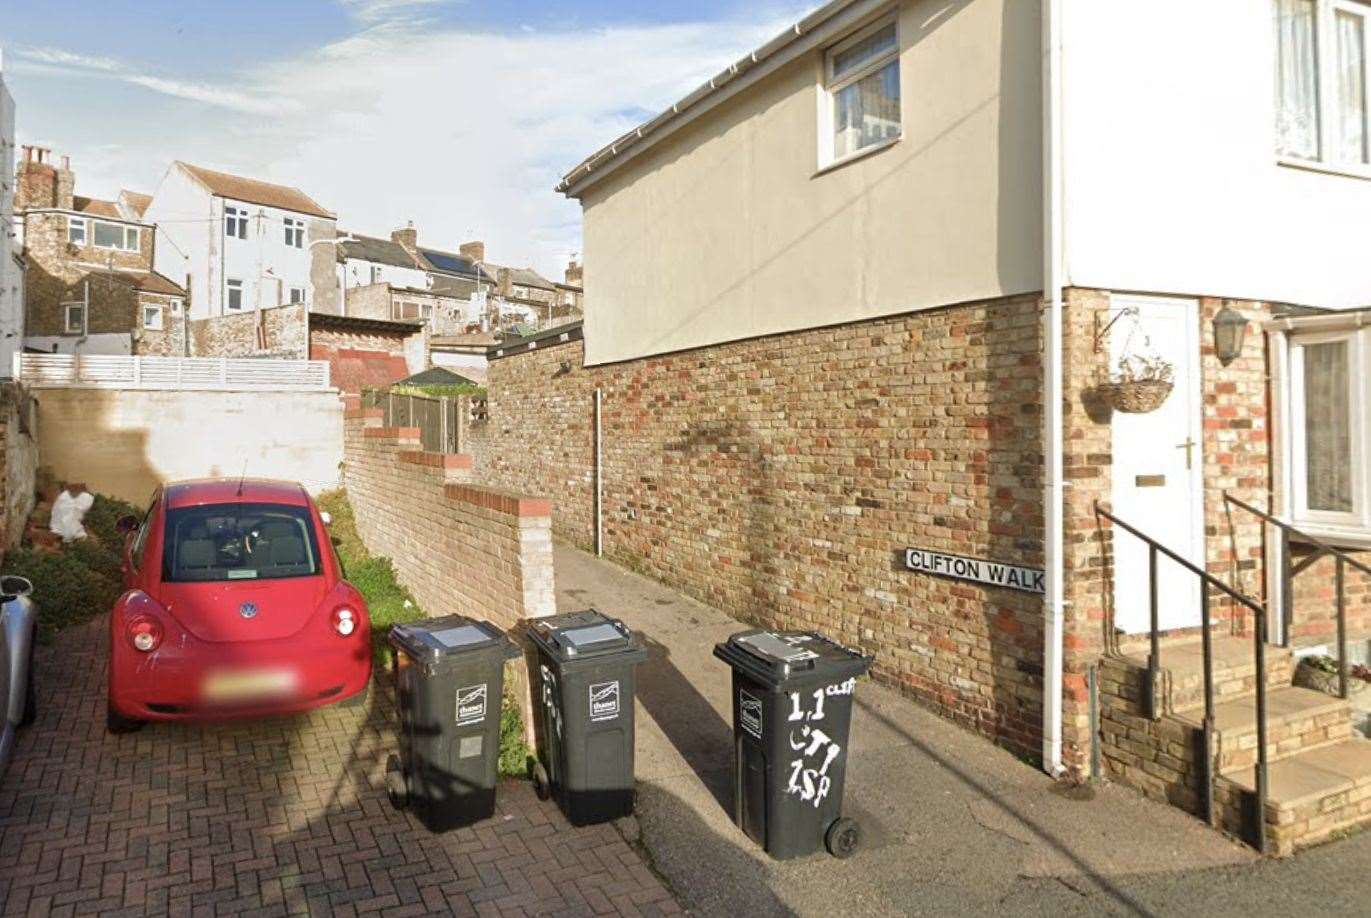 Suspected drug dealing has been reported from the property in Clifton Walk, Cliftonville. Picture: Google